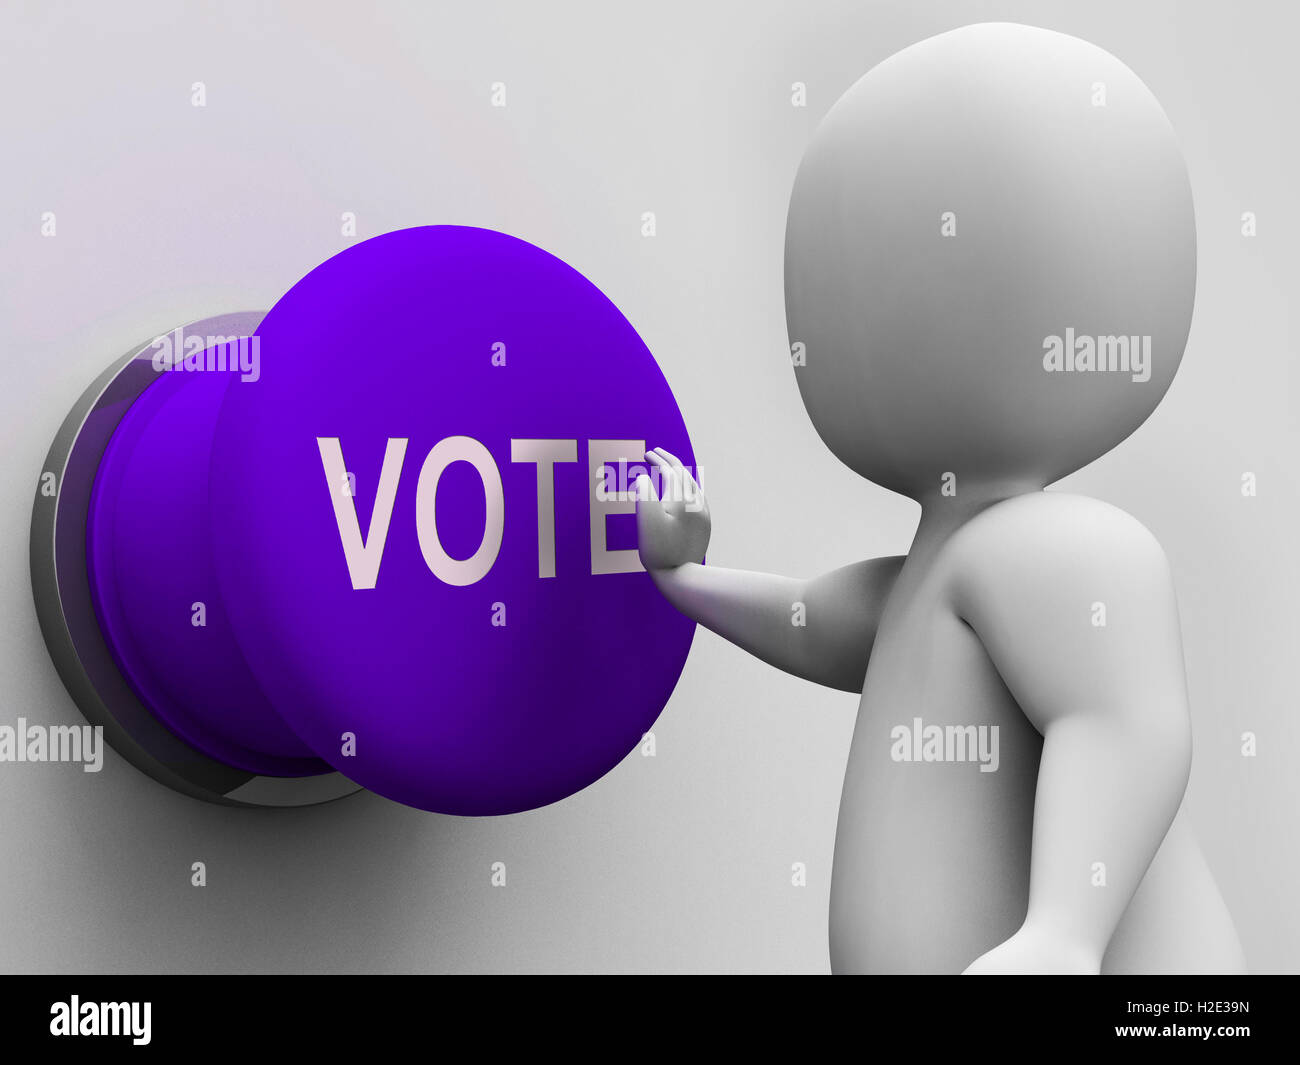 Vote Button Means Choosing Electing Or Poll Stock Photo